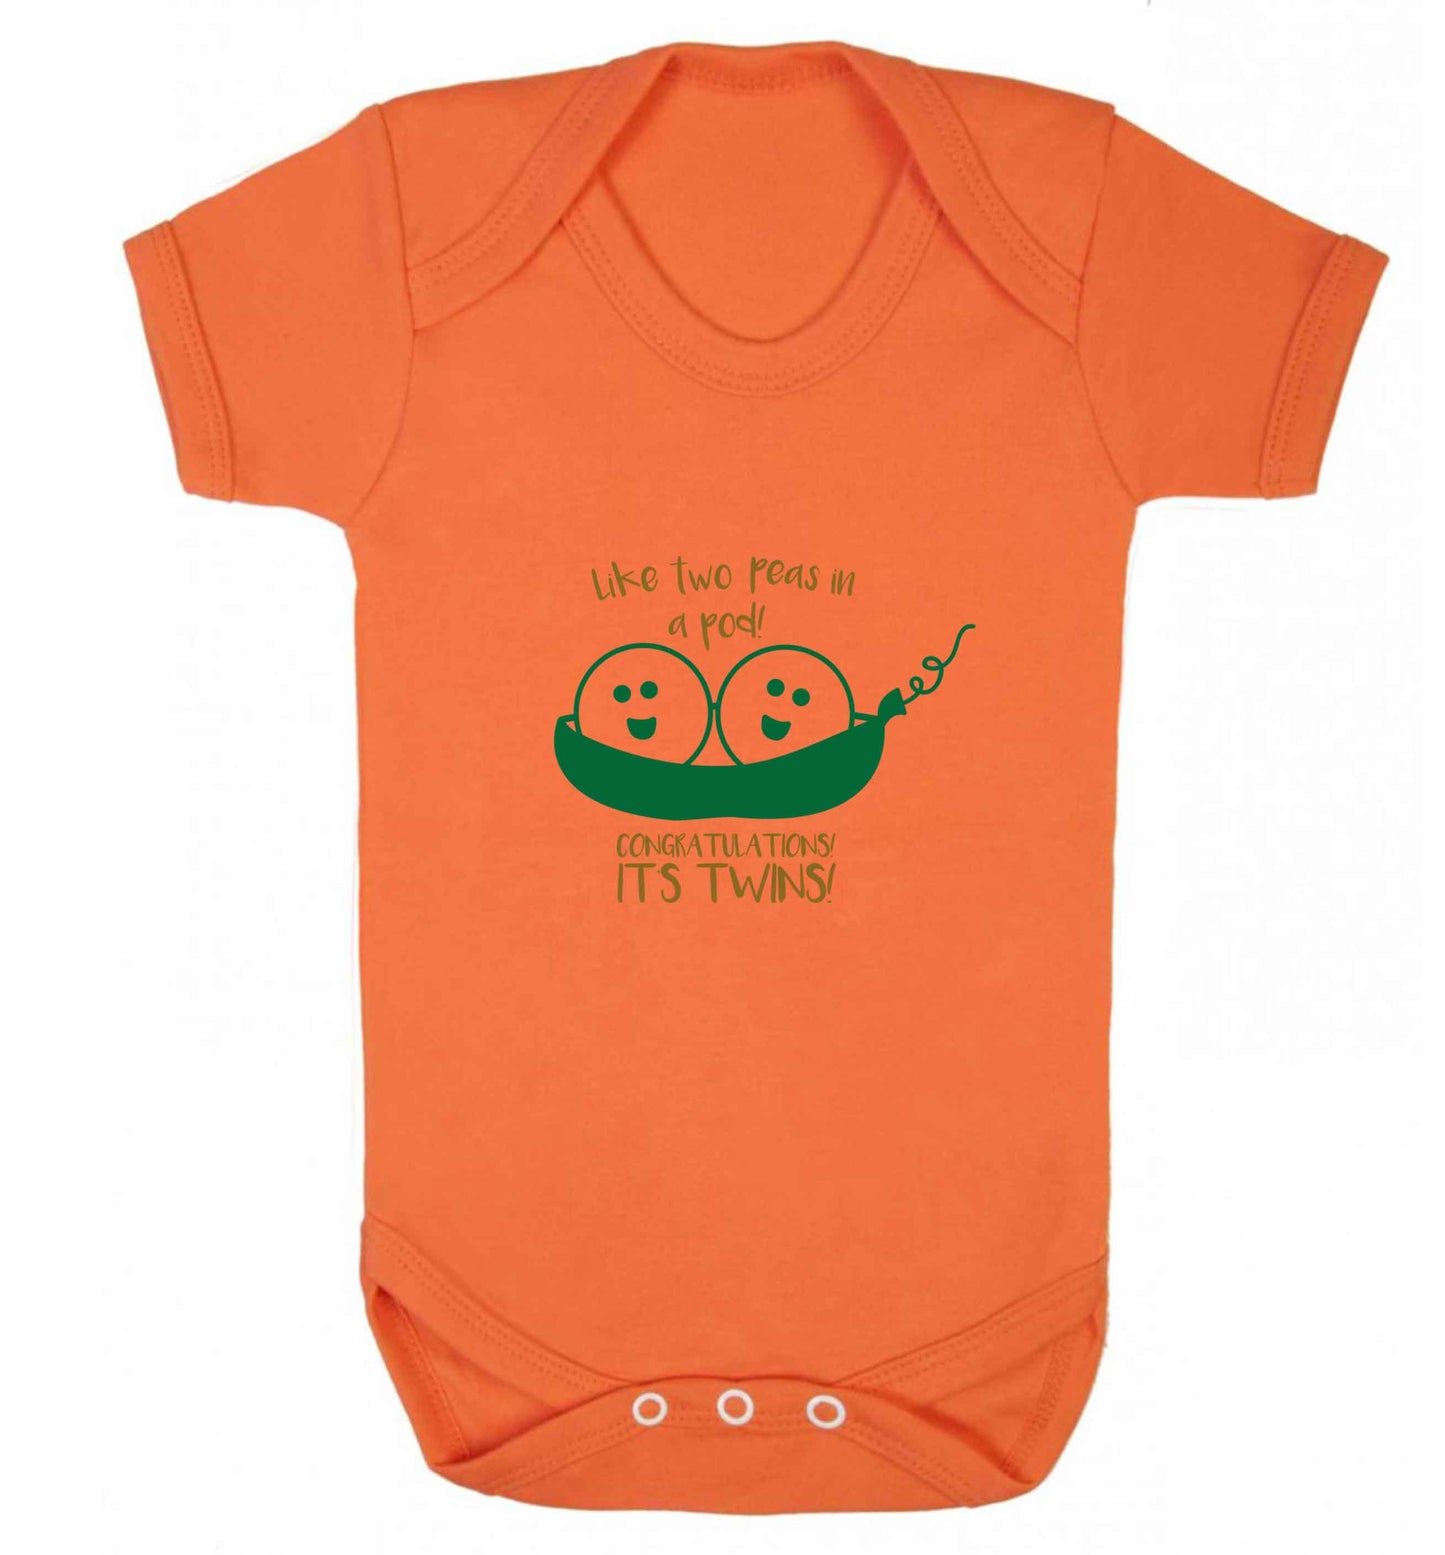 Like two peas in a pod! Congratulations it's twins! baby vest orange 18-24 months